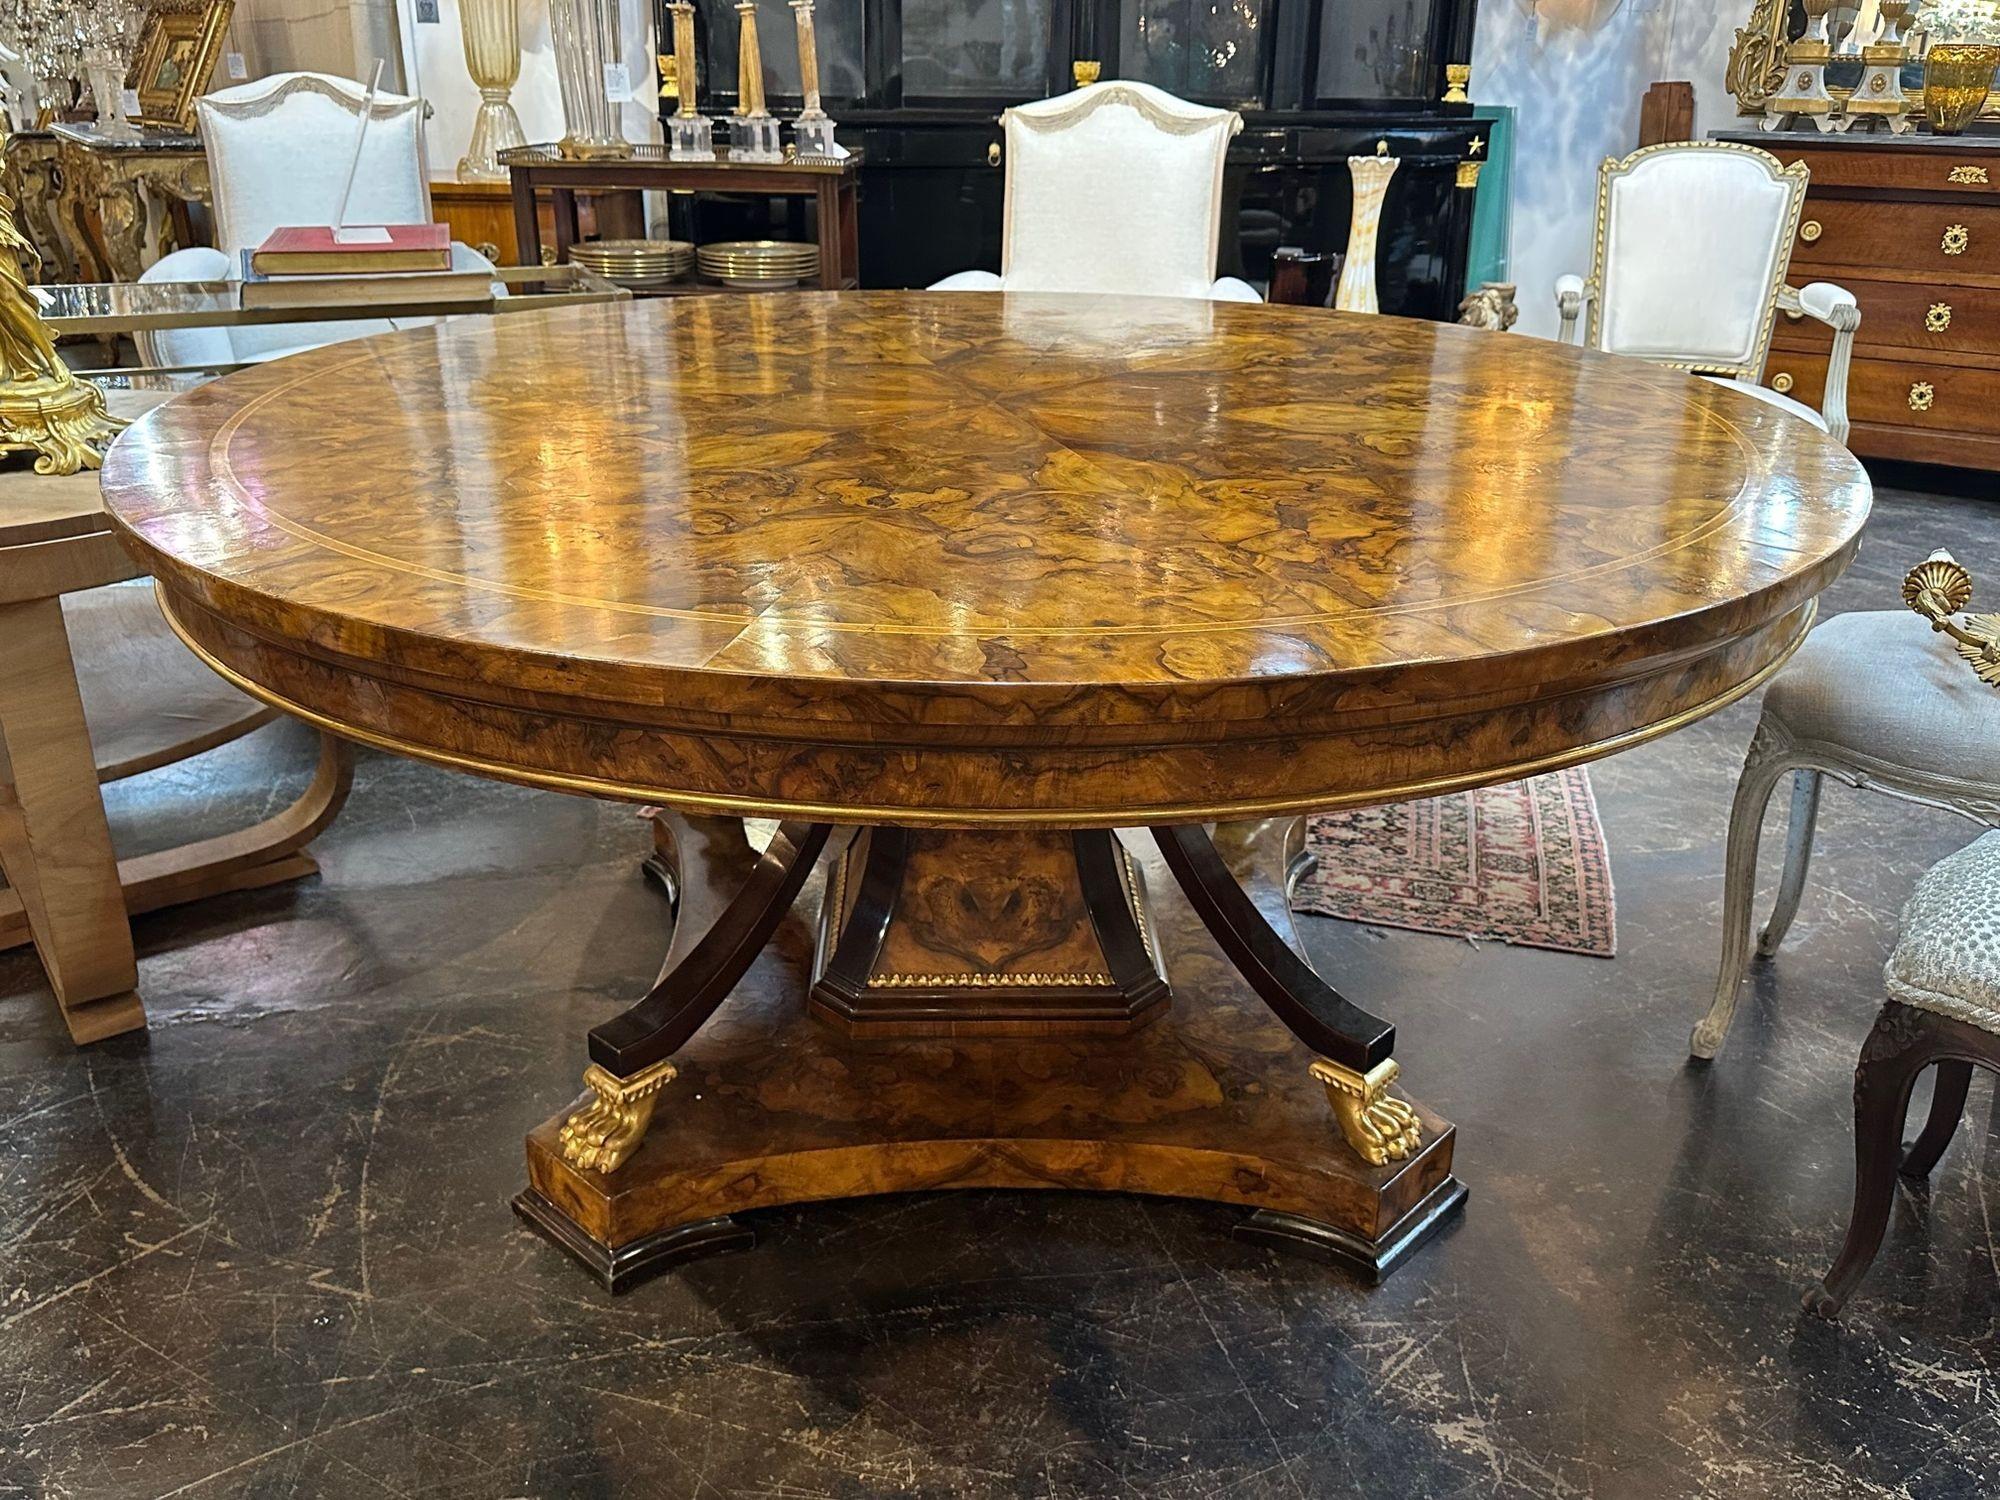 Outstanding large scale 19th century Italian Empire burl walnut and giltwood center table. circa 1880. Beautiful wood grain and polish!